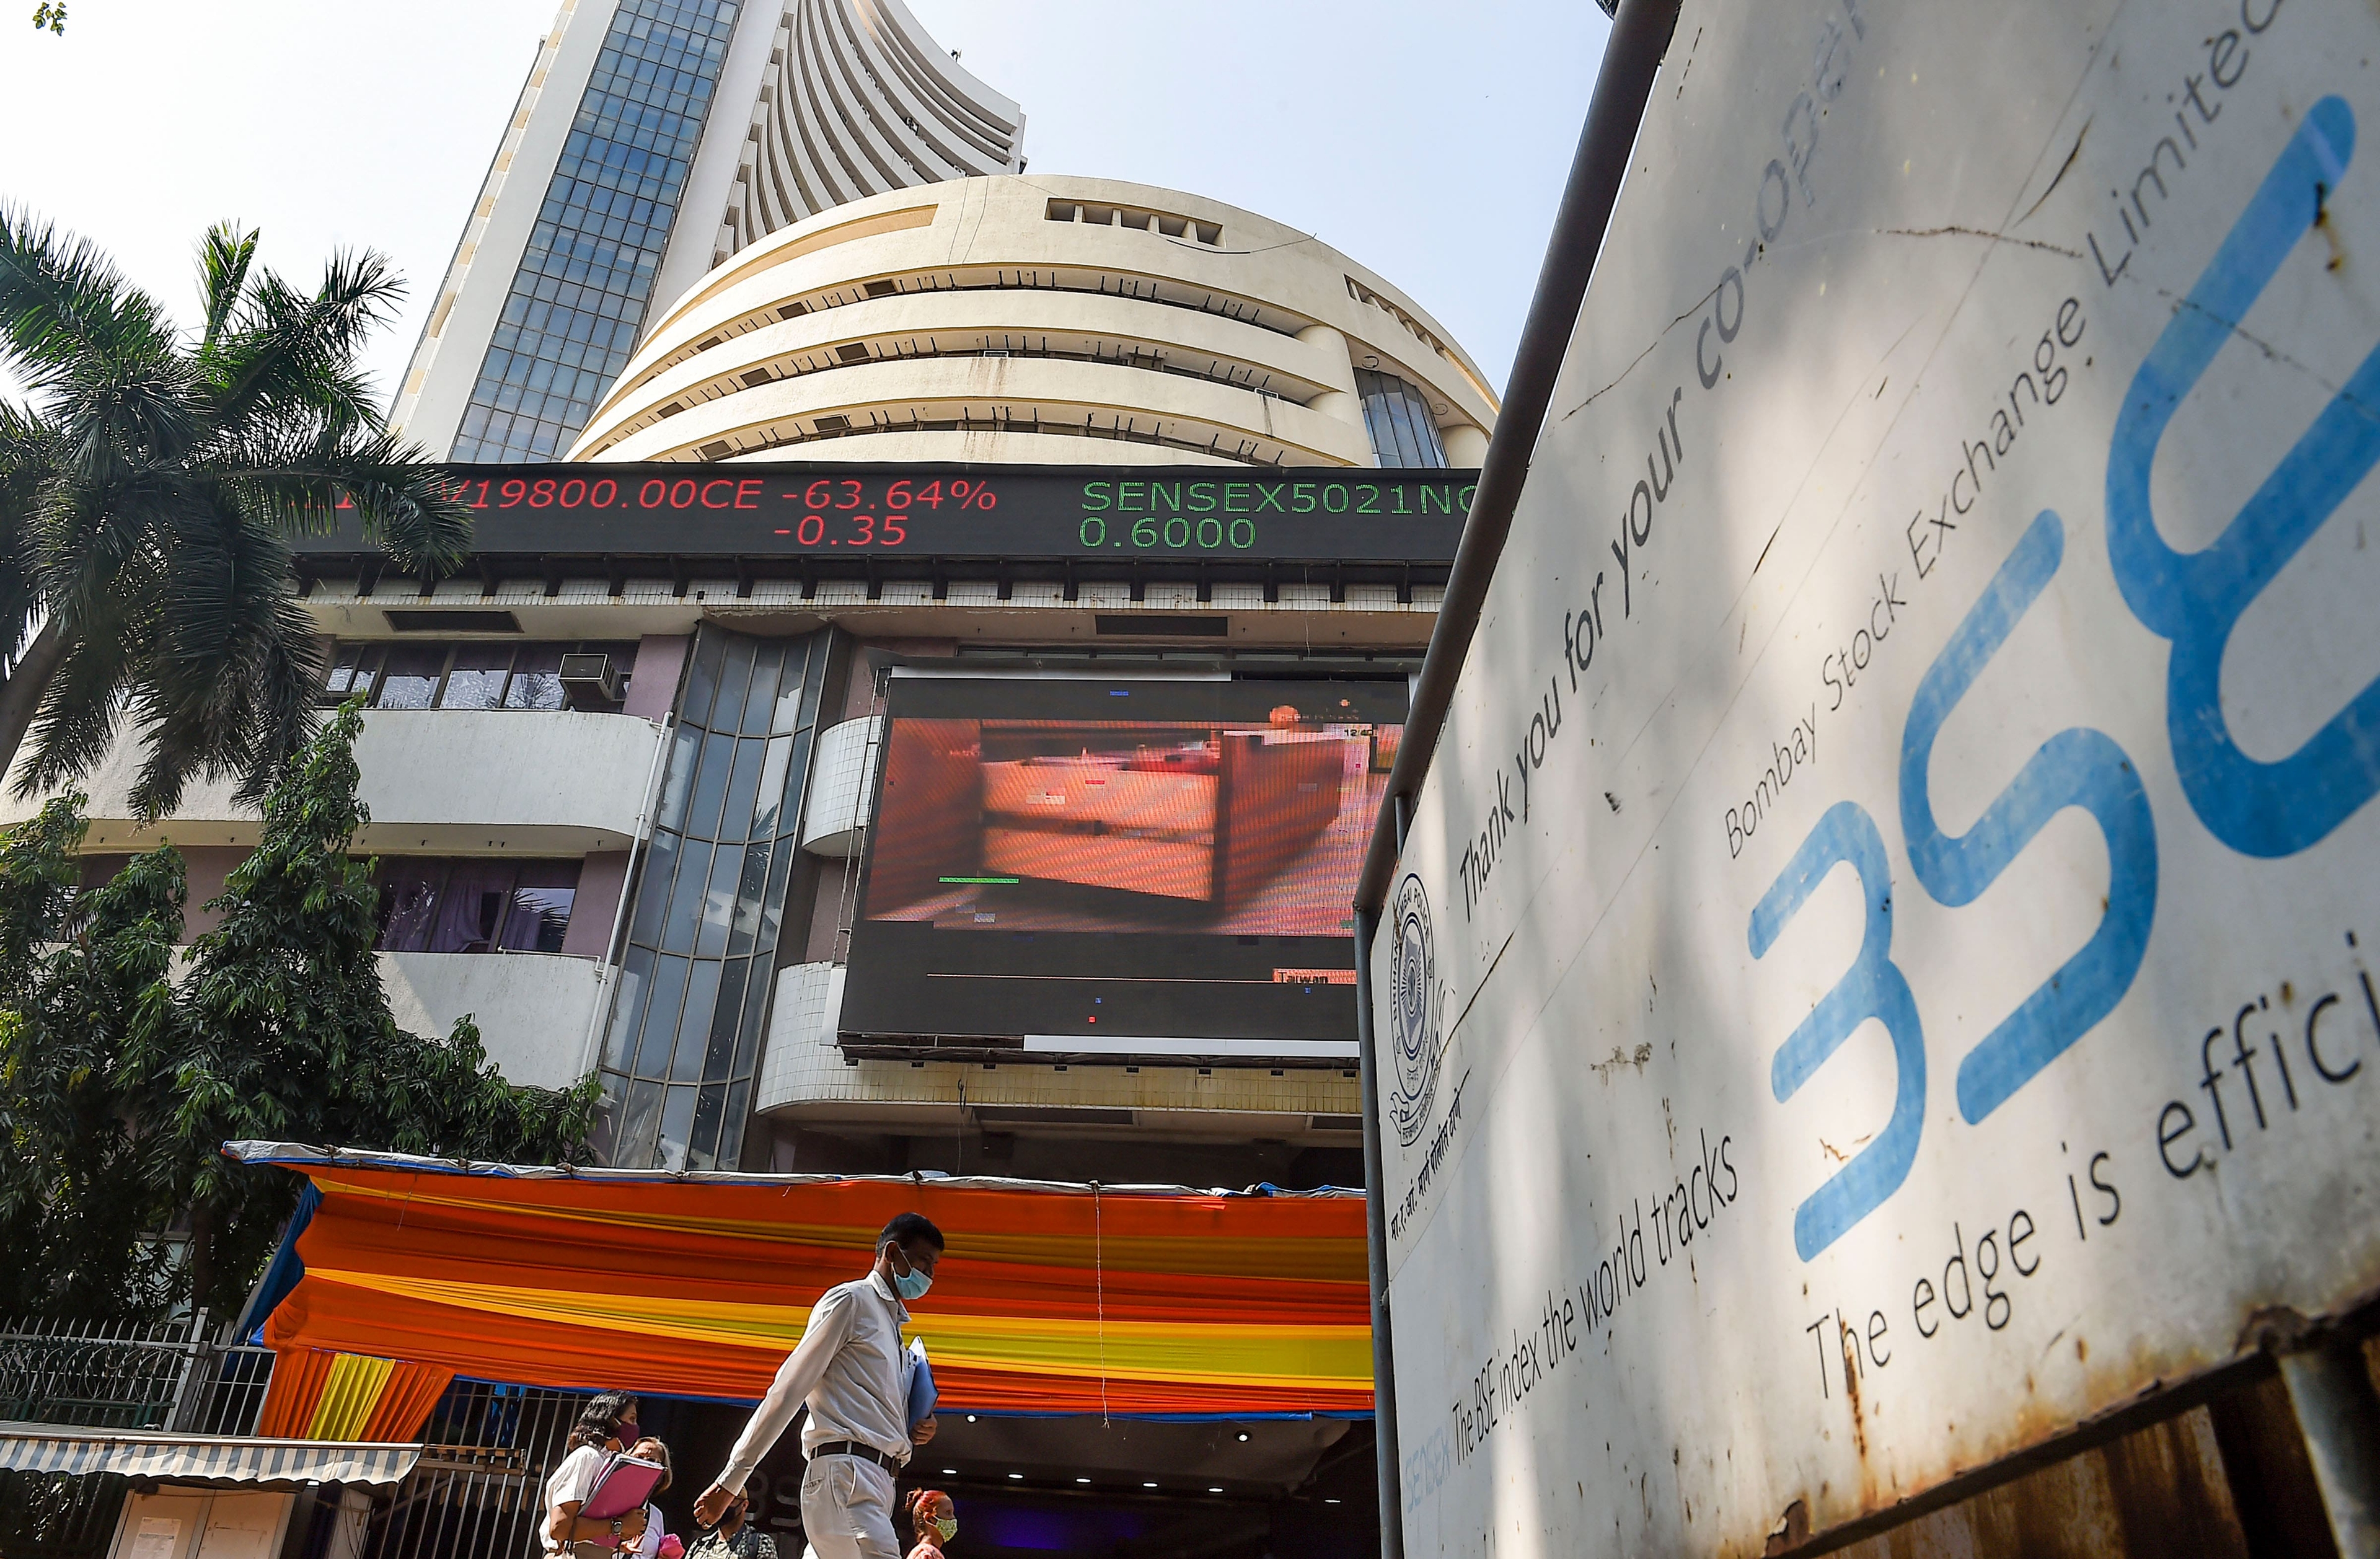 Following weak global cues, frontline indices the Sensex and the Nifty ended in the red on March 31, snapping the three-day winning run, as optimism around the Russia-Ukraine talks fizzled out after the Ukrainian President Volodymyr Zelenskiy said Ukrainian forces are preparing for fresh Russian attacks. Sensex remained volatile through the session and ended the day 115 points, or 0.20 percent, lower at 58,568.51. Nifty closed the day 34 points, or 0.19 percent, lower at 17,464.75.